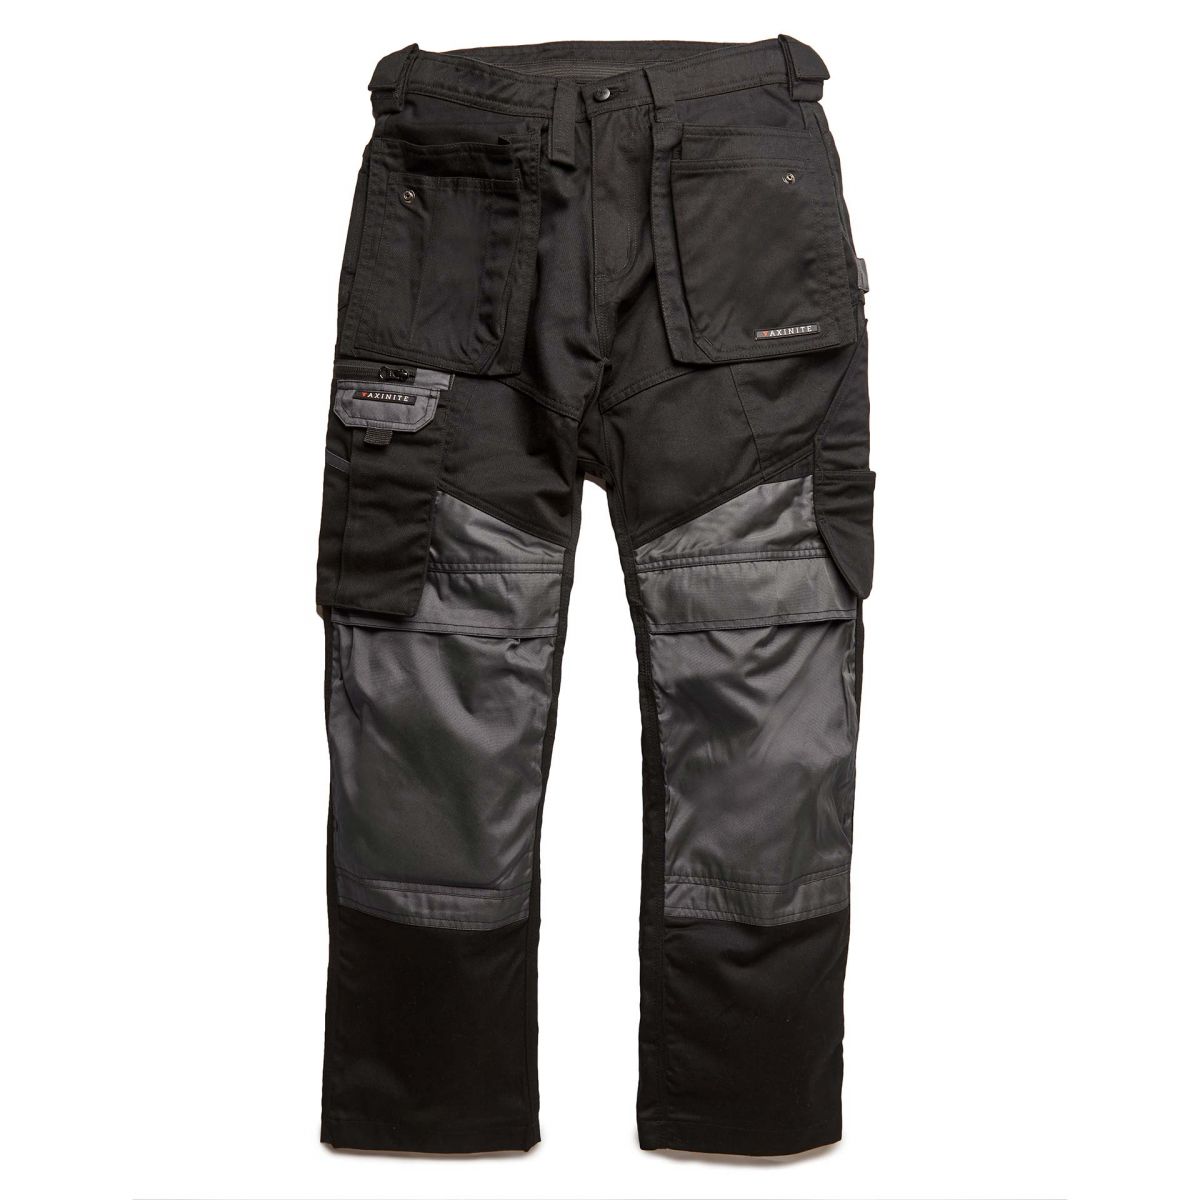 View Axinite AX39 Workwear Trousers Black 28R information